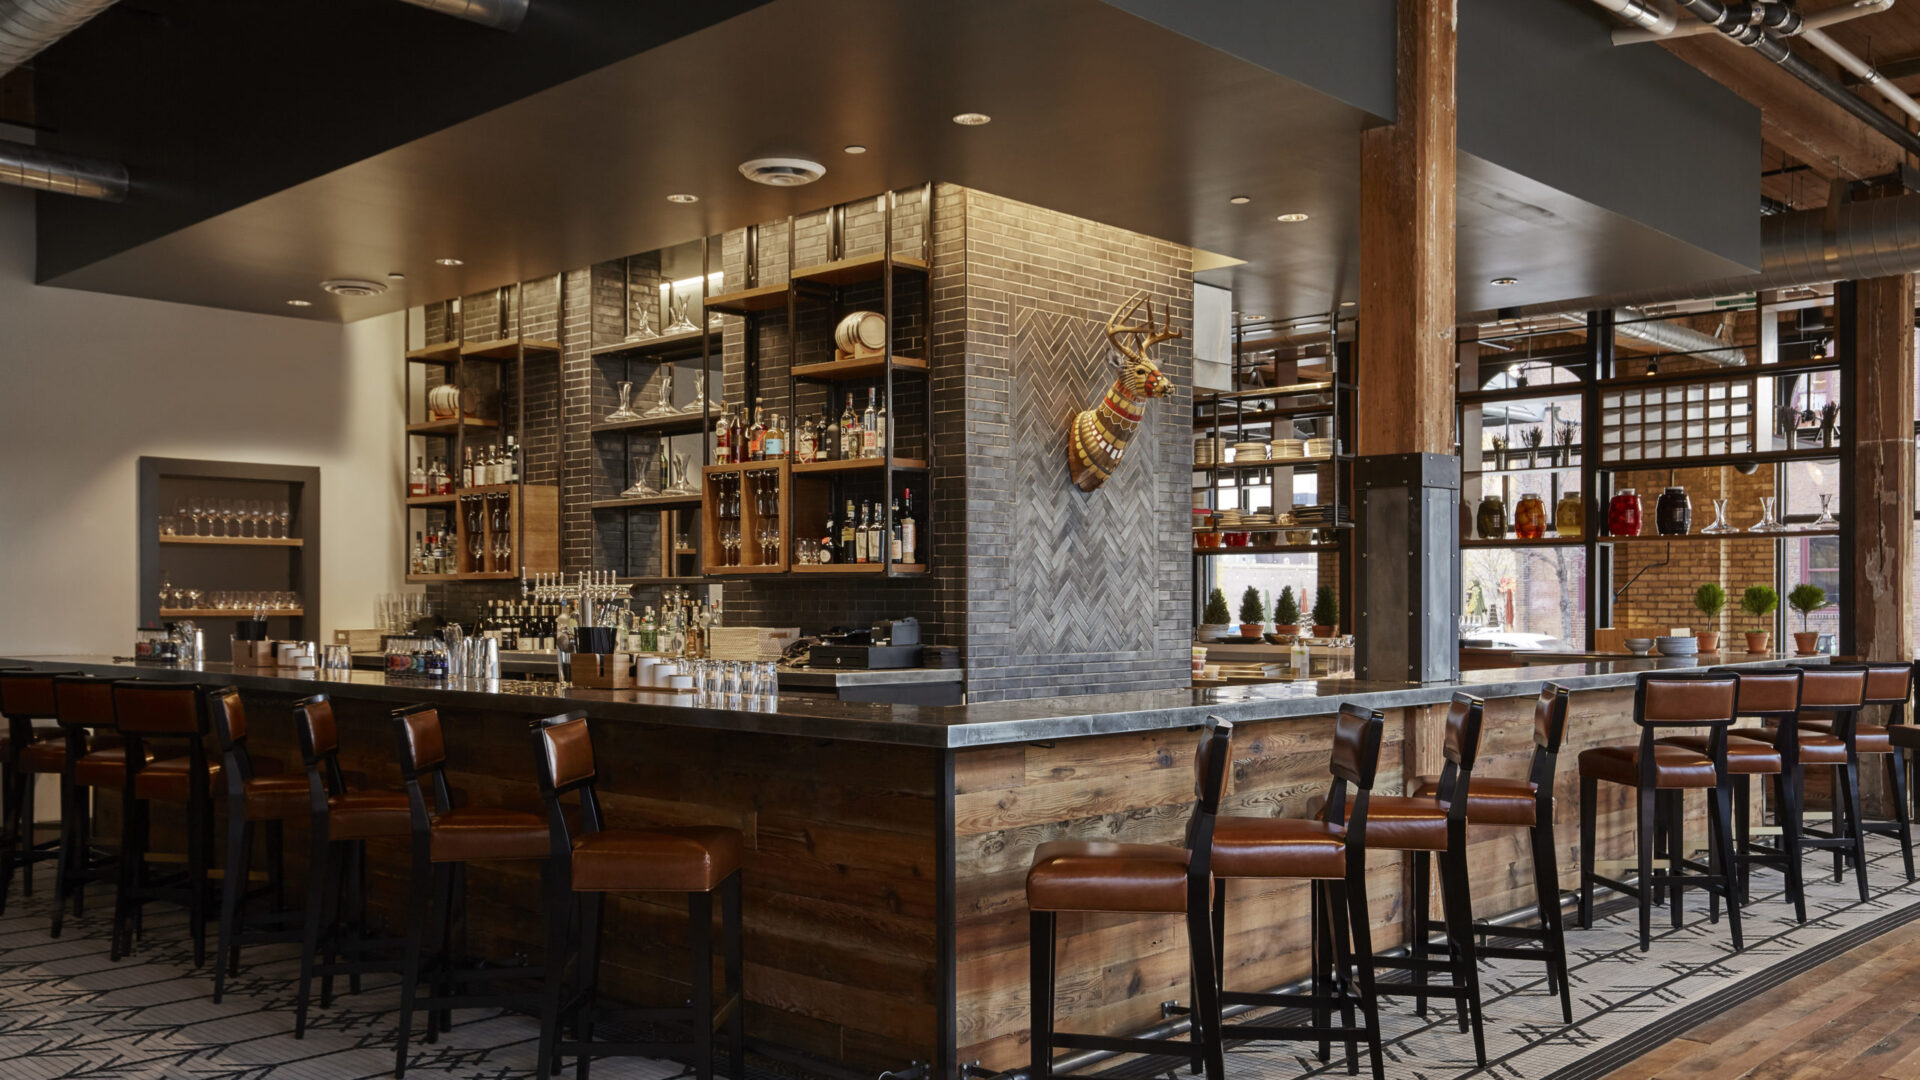 Cozy wooden bar with neatly lined up stools at our Minneapolis boutique hotel